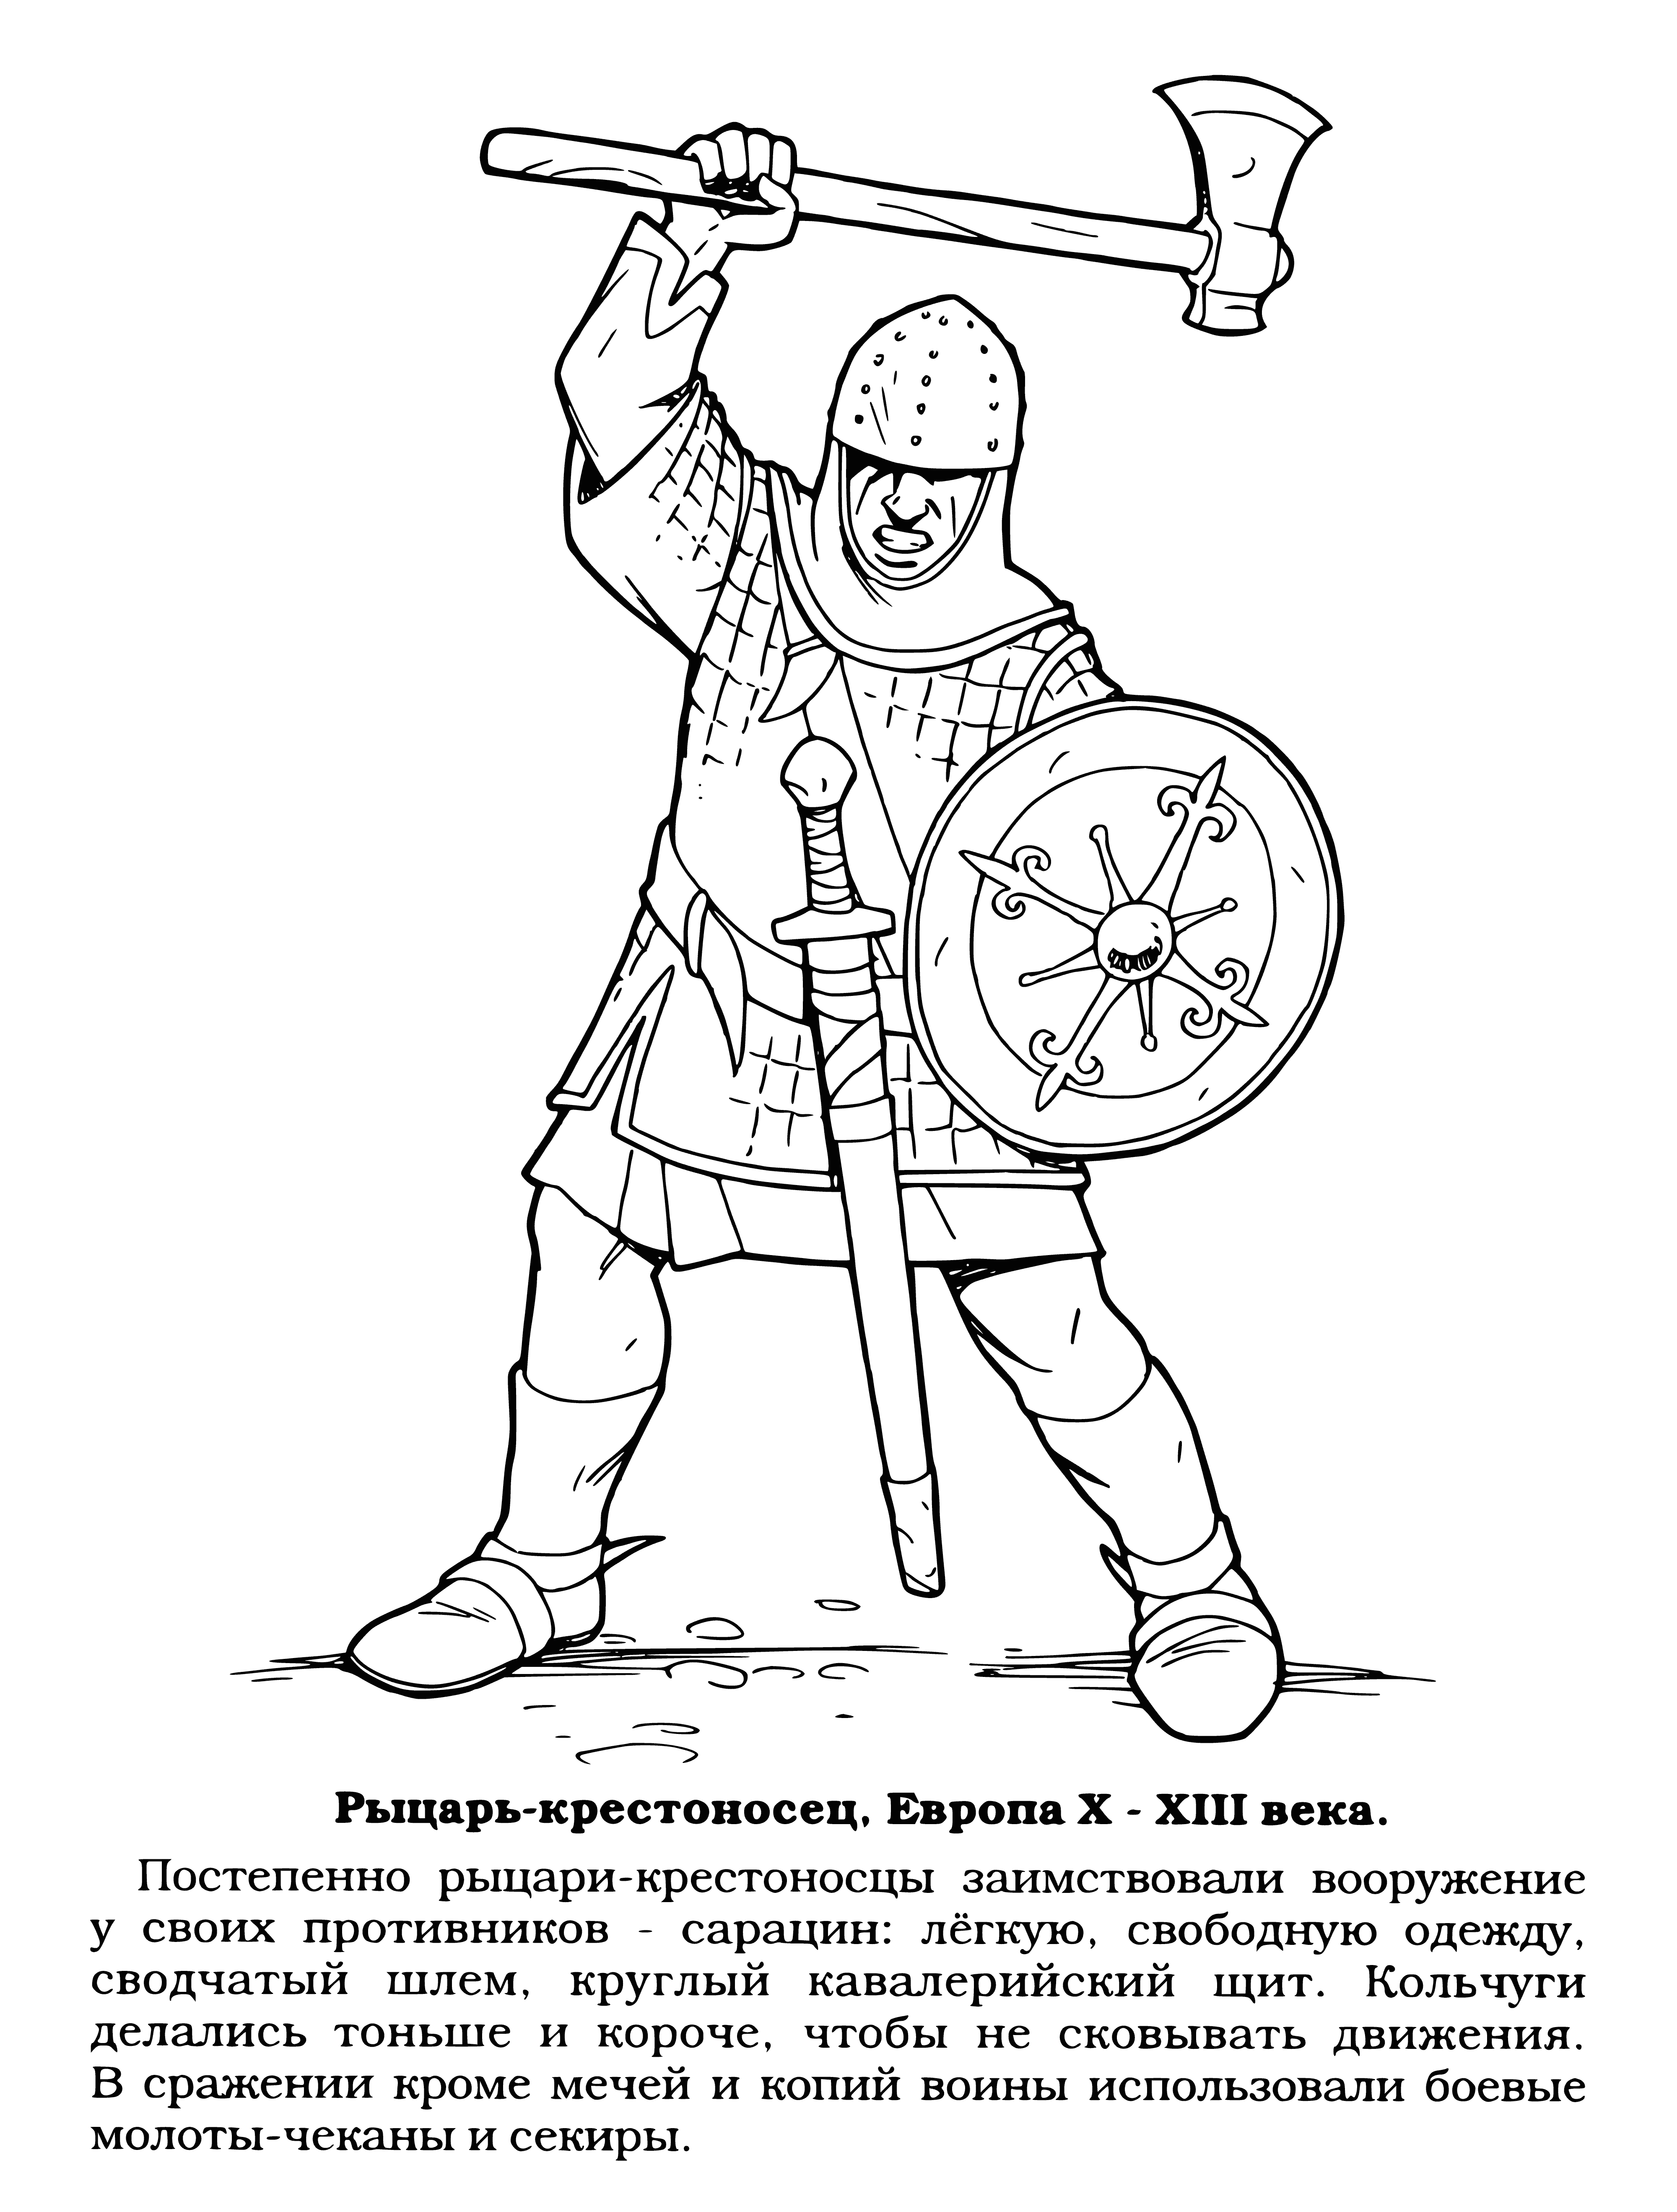 coloring page: Crusaders are knights who fight for Christian faith and journey to Holy Land to fight Muslims for control of Jerusalem.